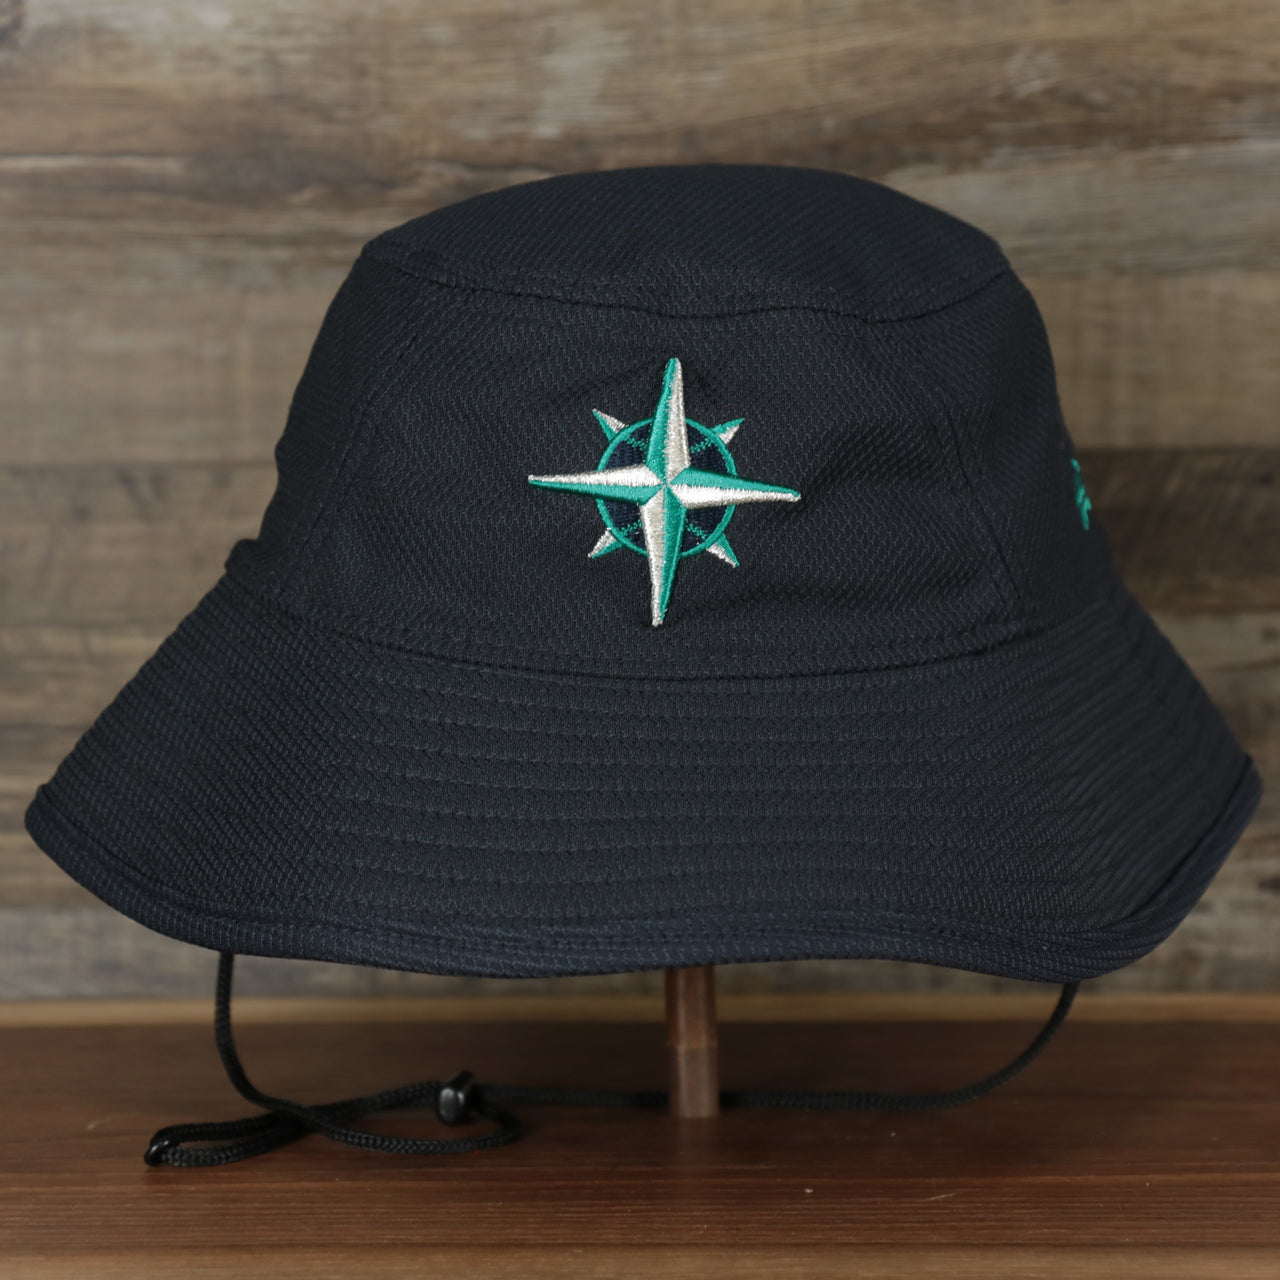 The Seattle Mariners MLB 2022 Spring Training Onfield Bucket Hat